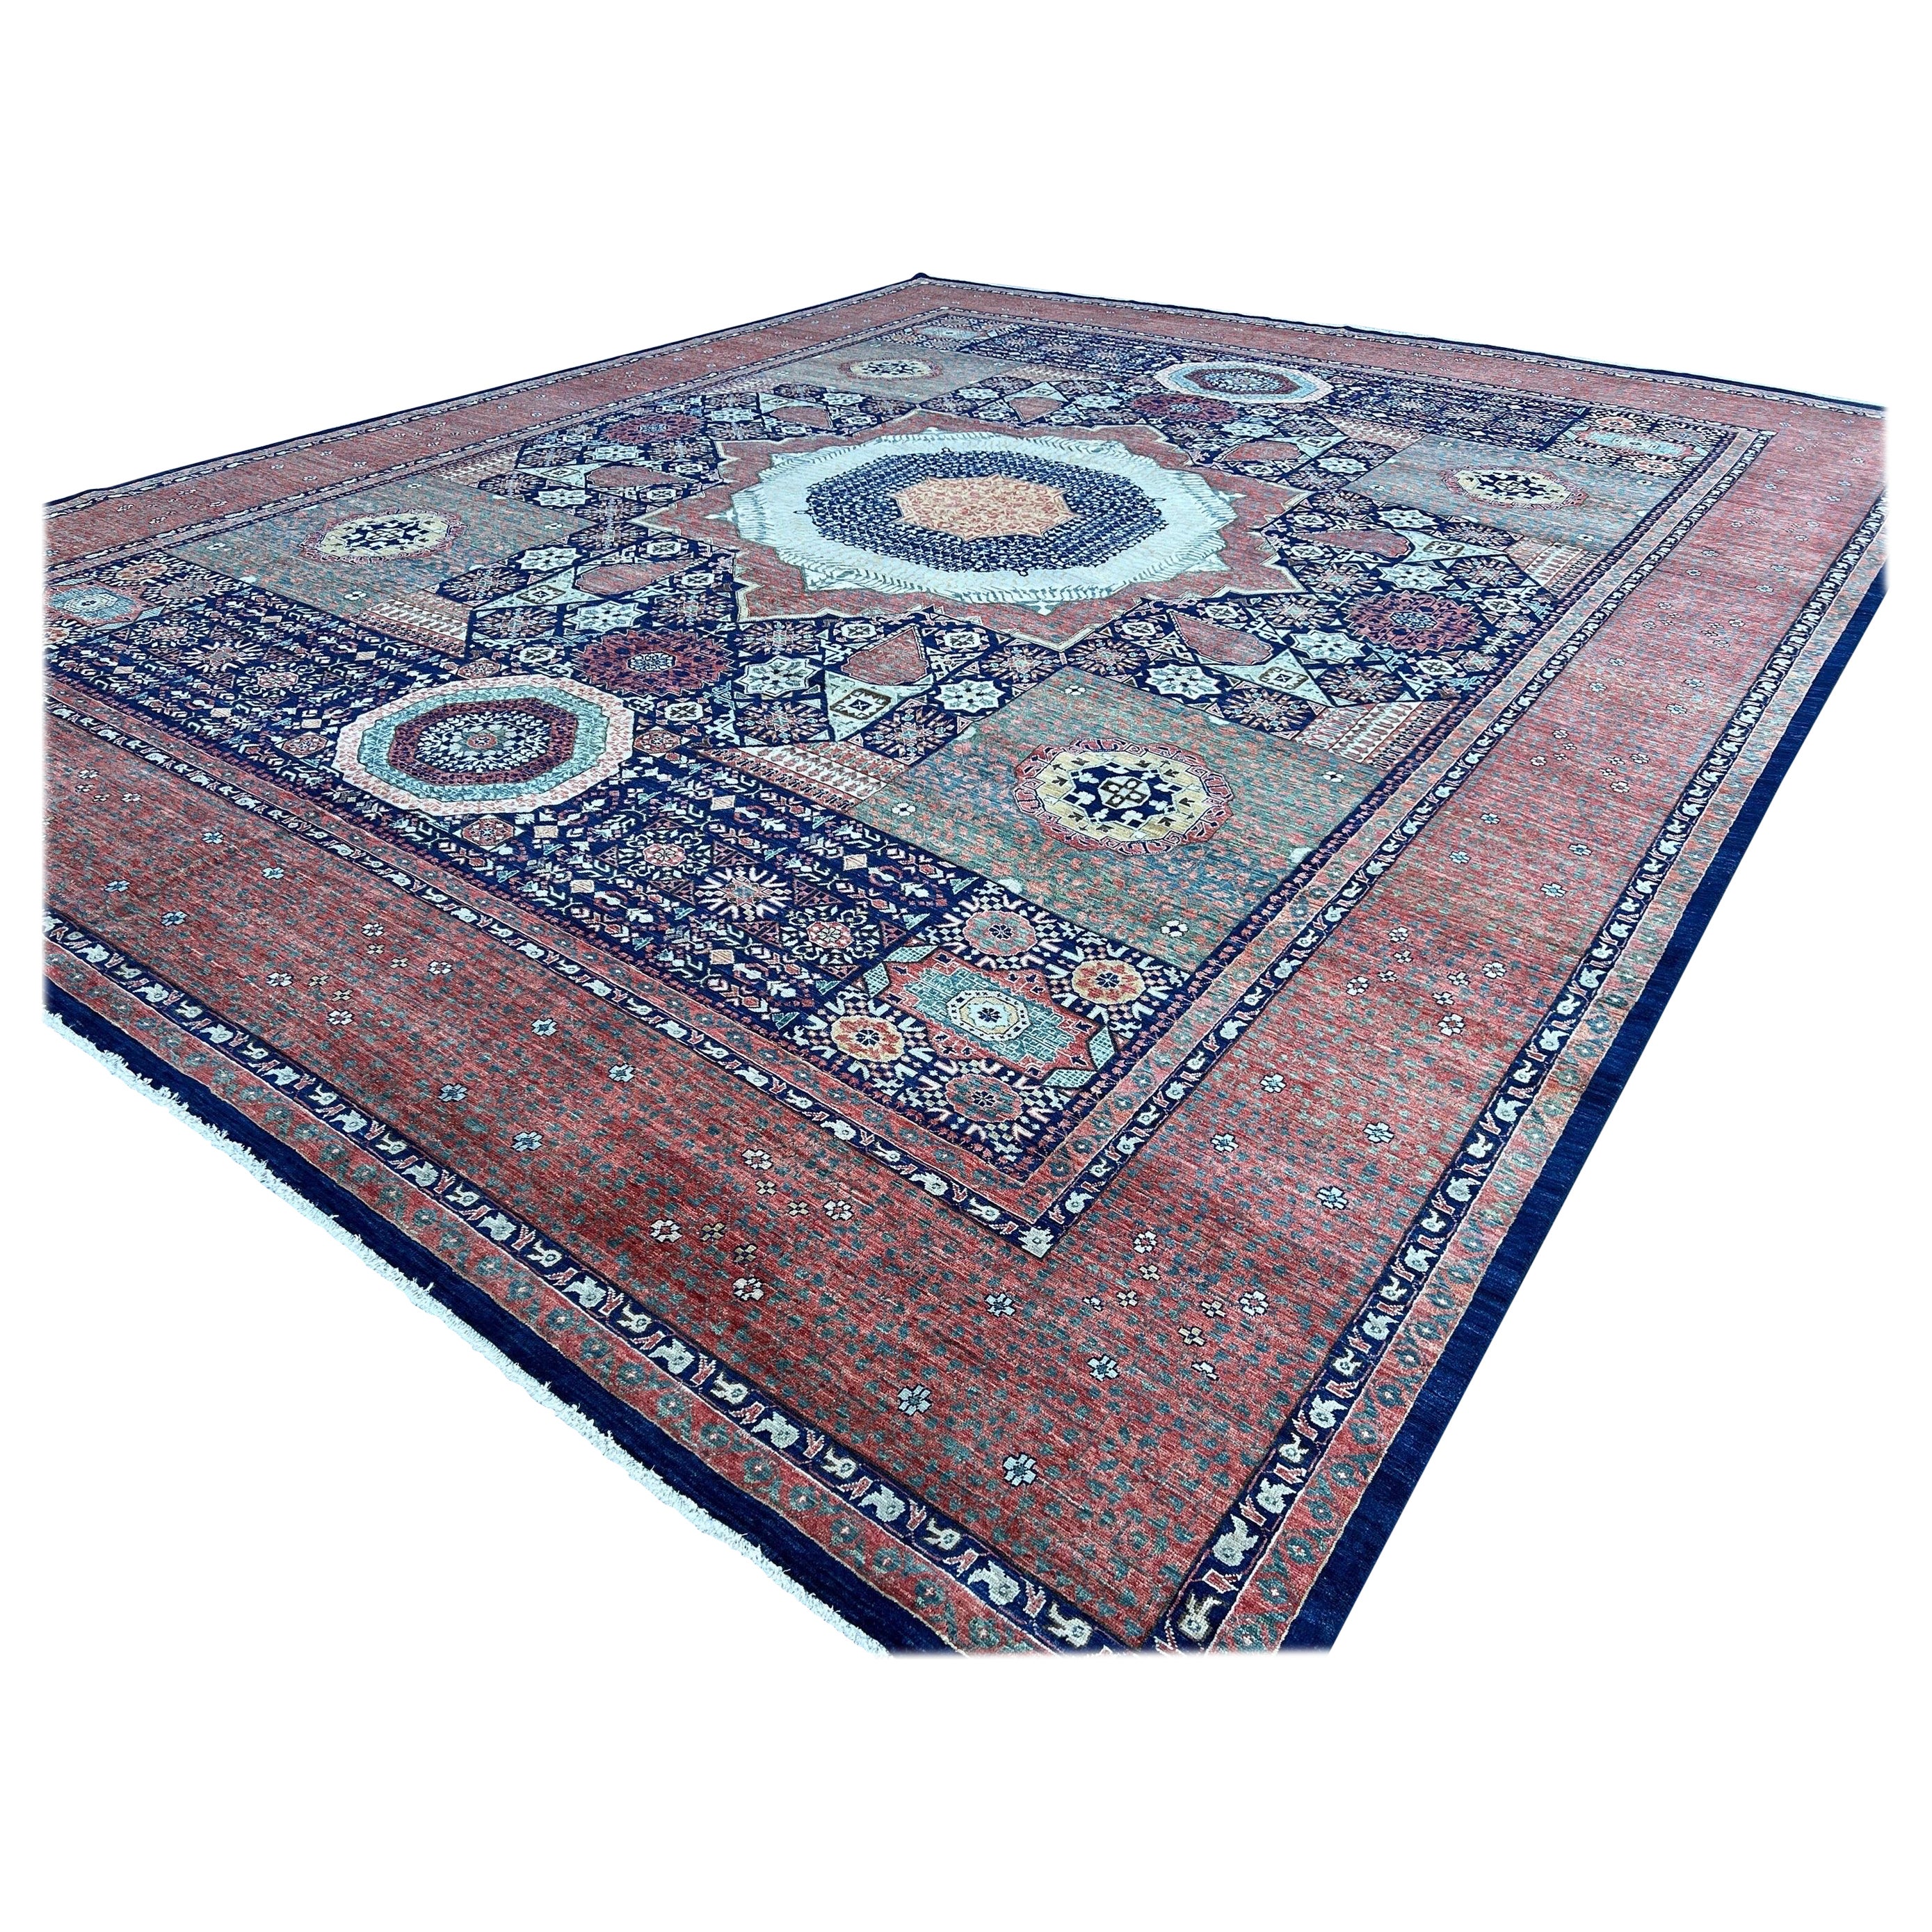 Hand-Knotted Afghan Mamluk Area Rug Salmon Pink Red Navy Blue Teal Sage For Sale